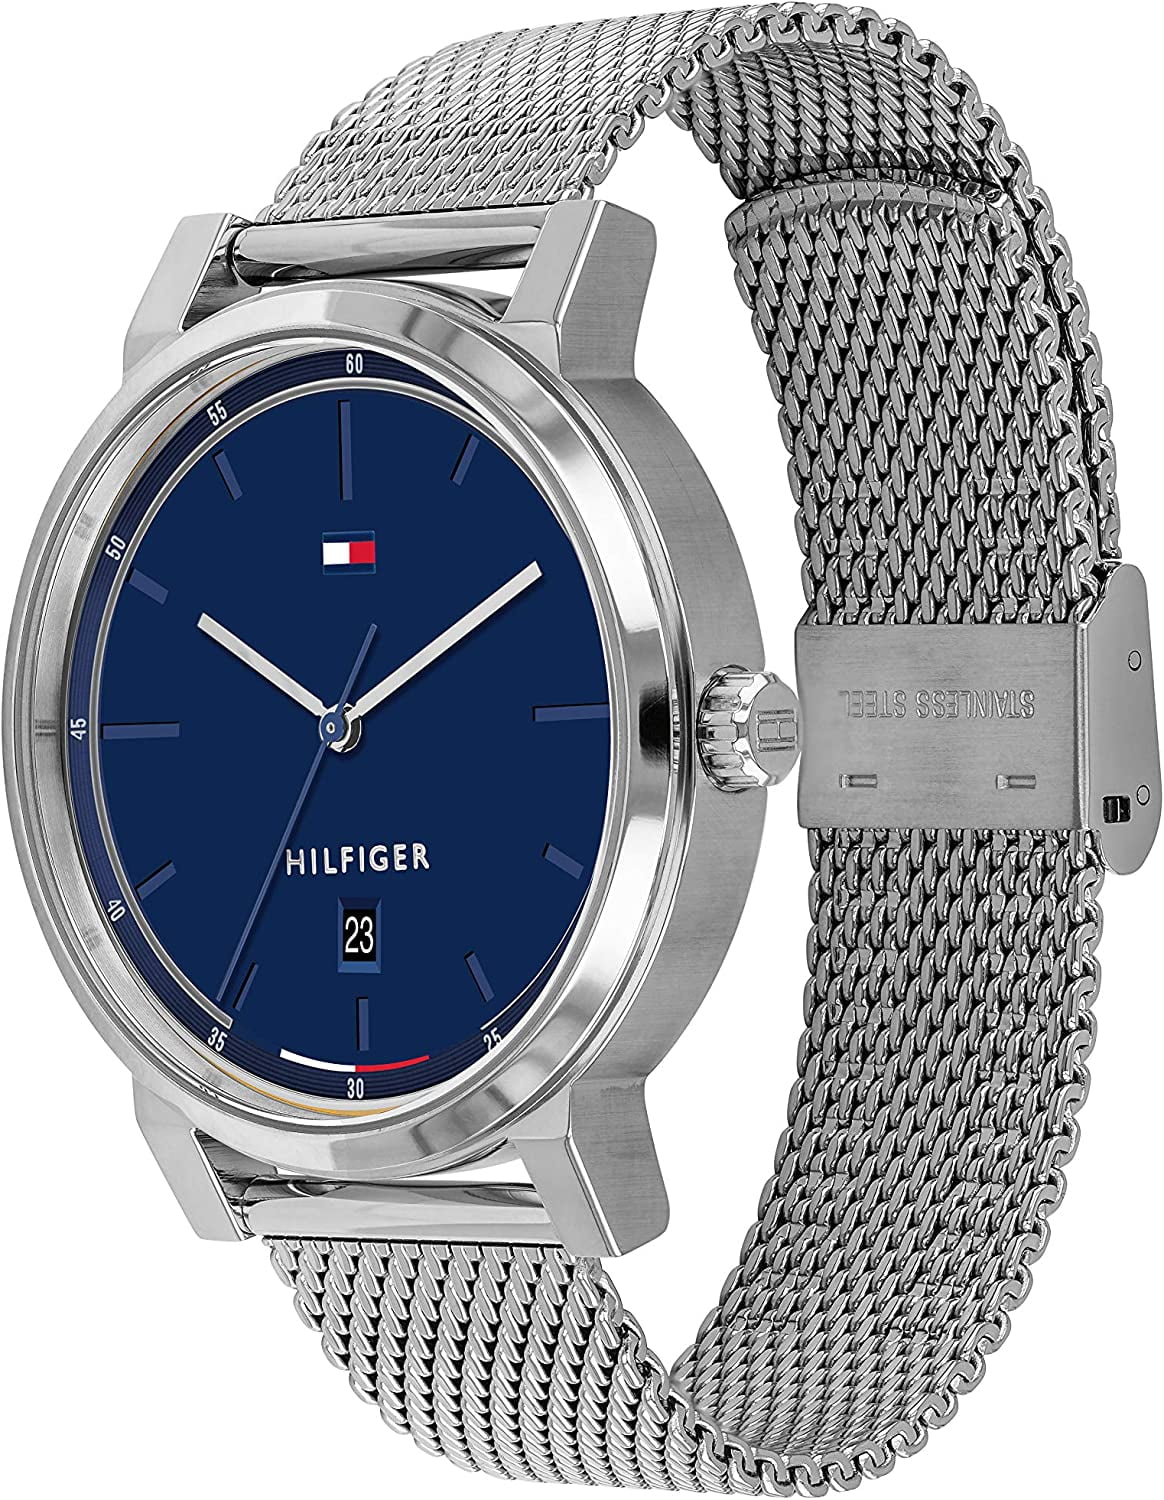 Hilfiger Watch Steel Thompson Mesh Mens 1791732 Stainless Tommy